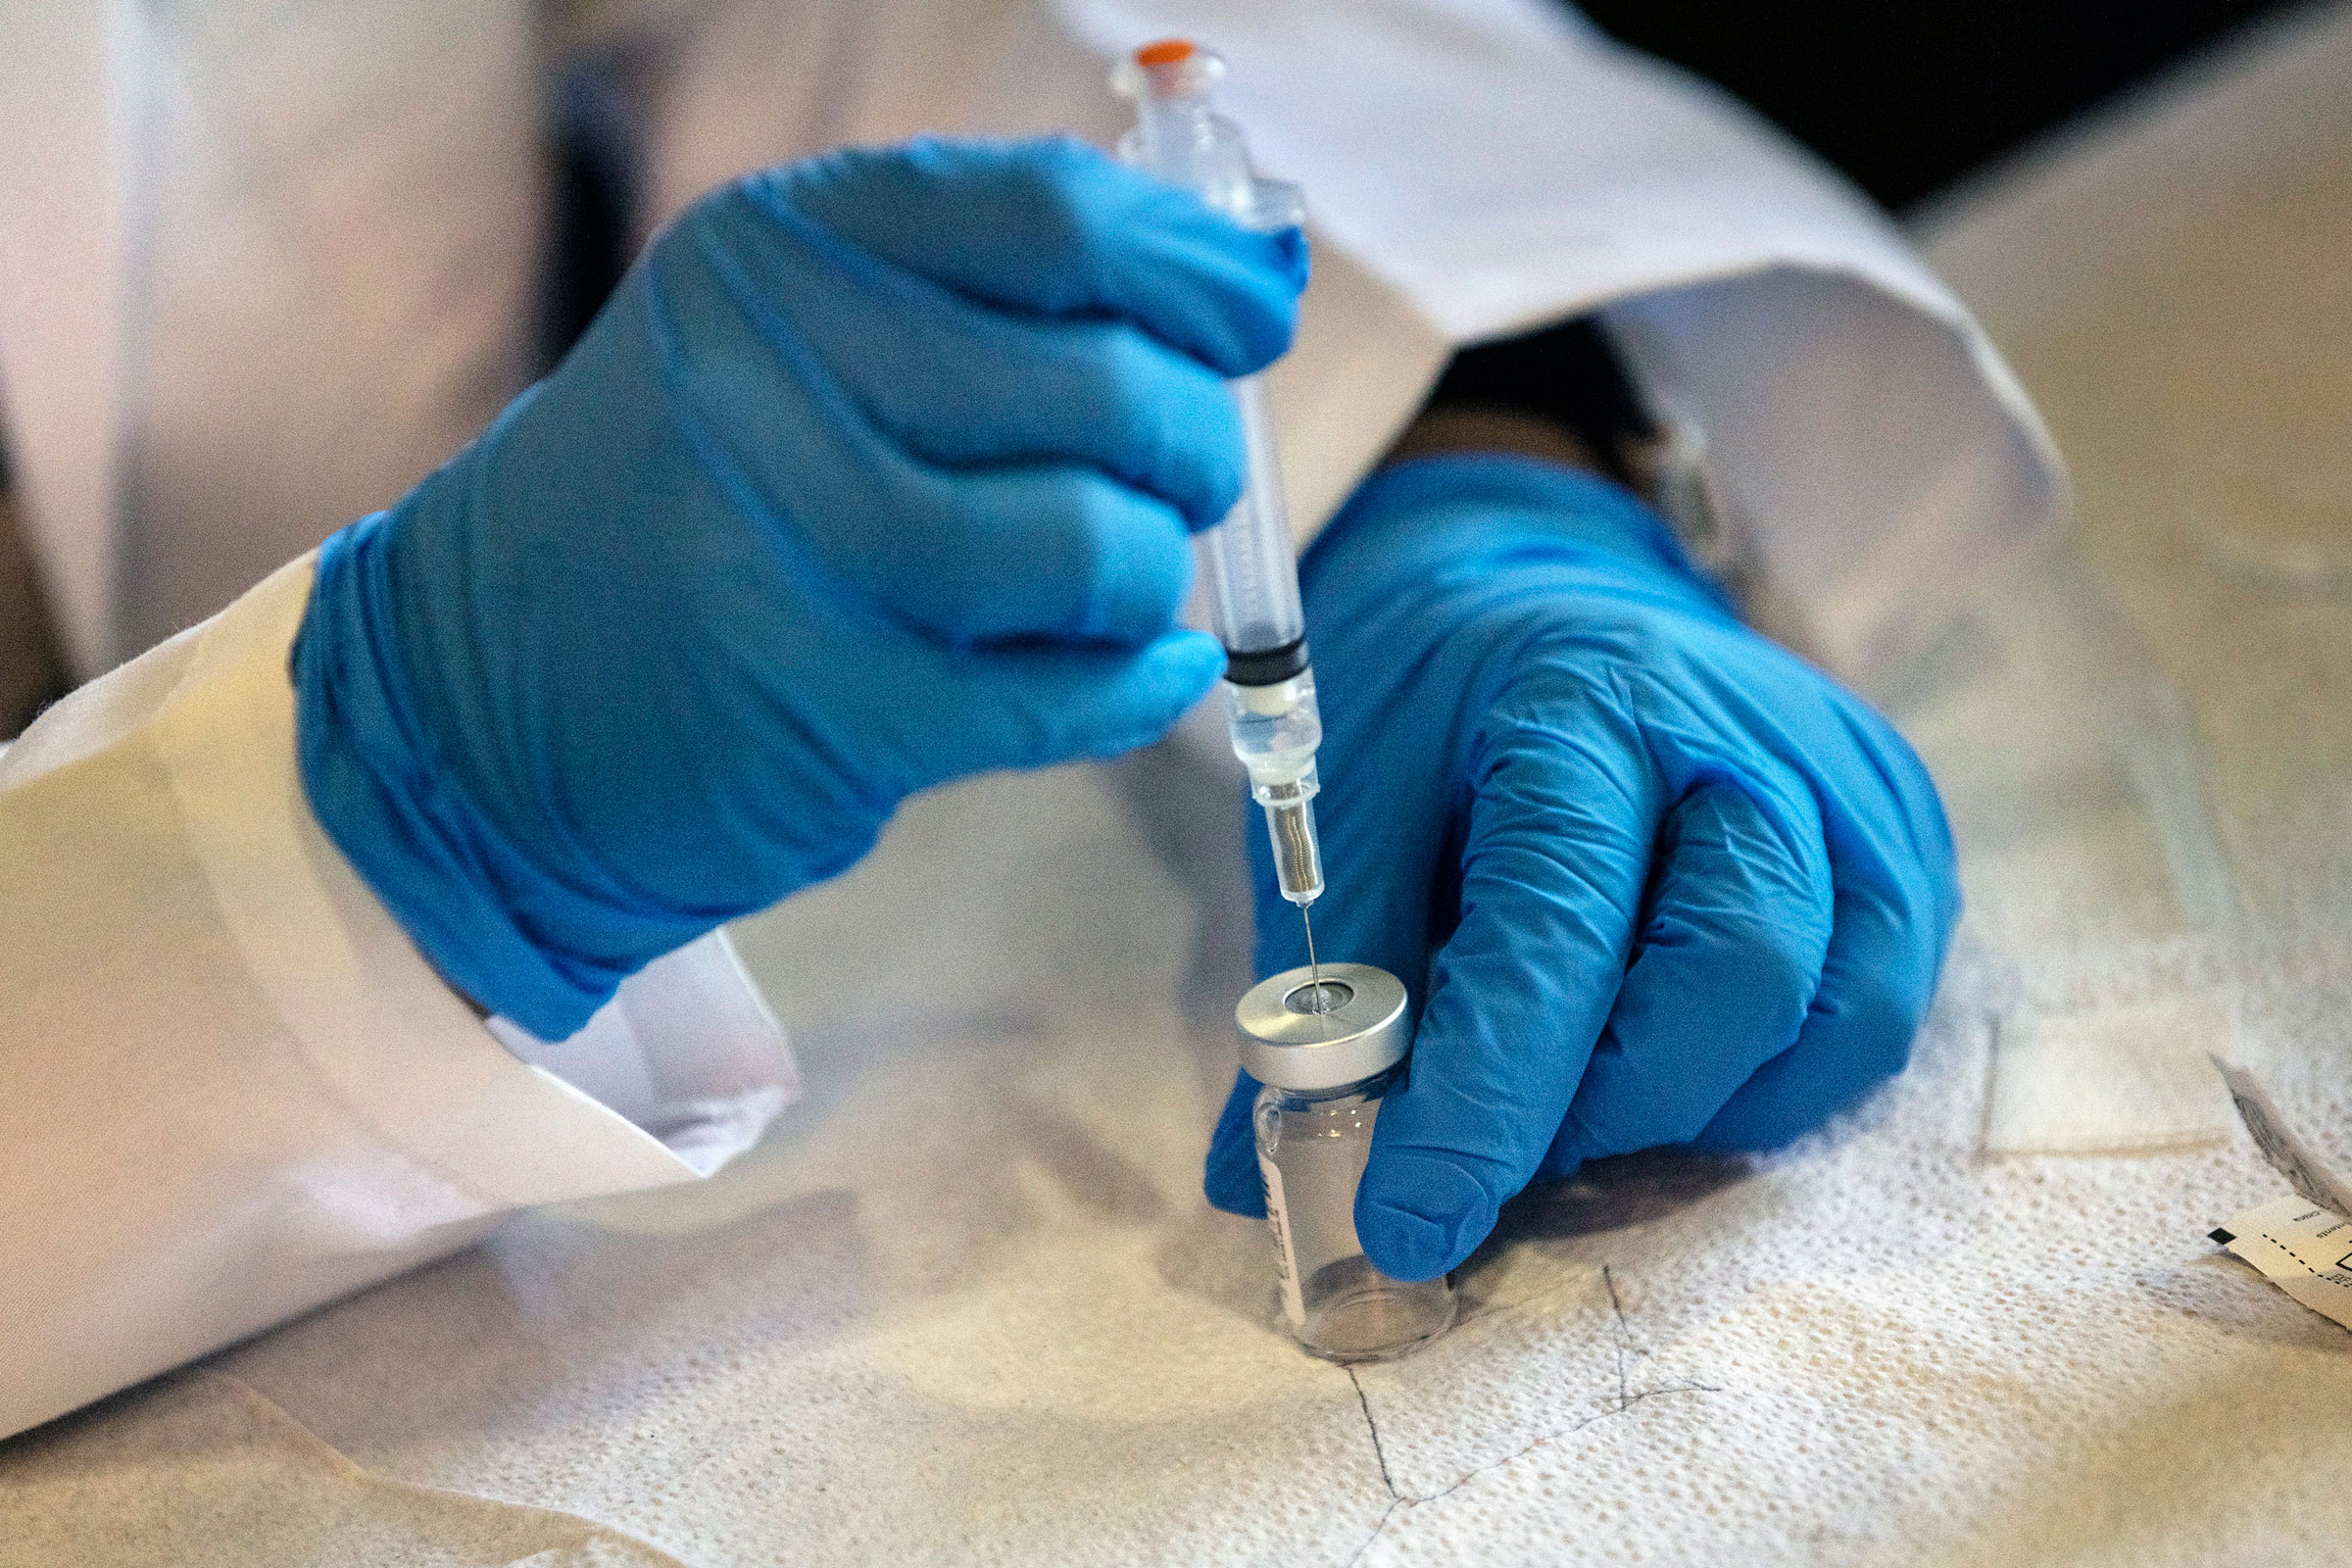 A dose of polio vaccine is prepared on July 22, 2022, at a pop-up vaccination clinic that was opened in Pomona, N.Y., after a polio case was discovered in Rockland County. (Victor J. Blue—The New York Times/Redux)